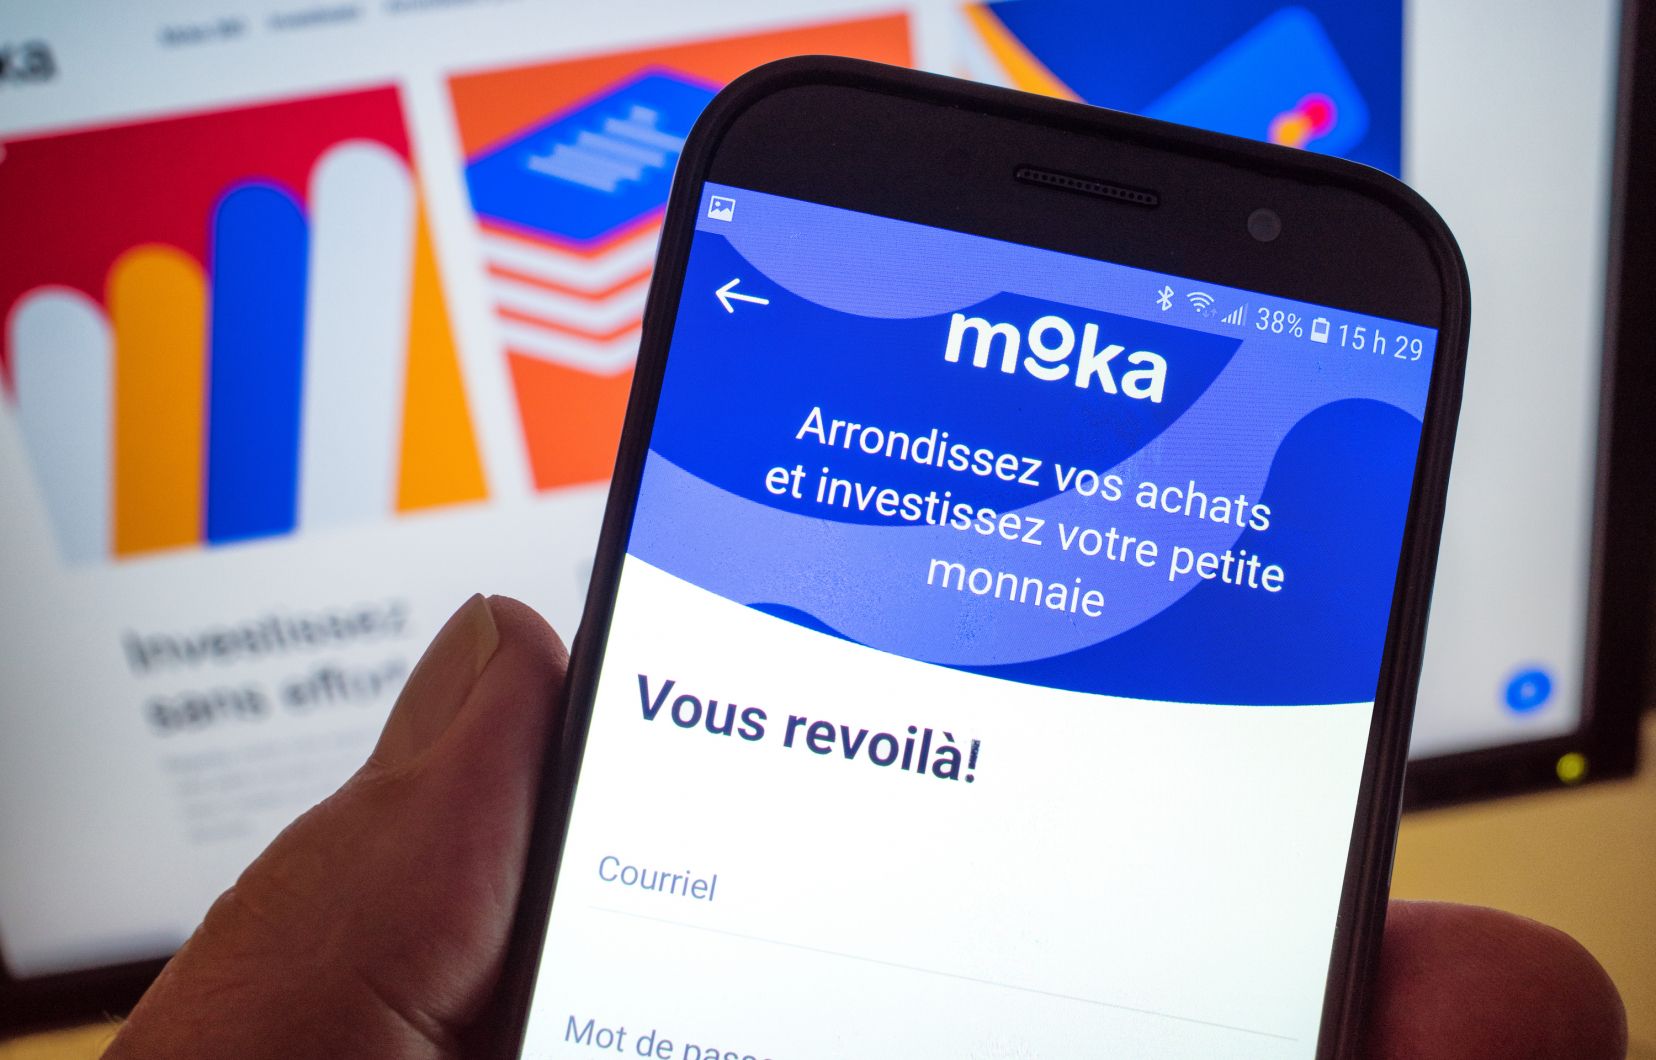 The Montreal fintech Moka was acquired by a Vancouver company

